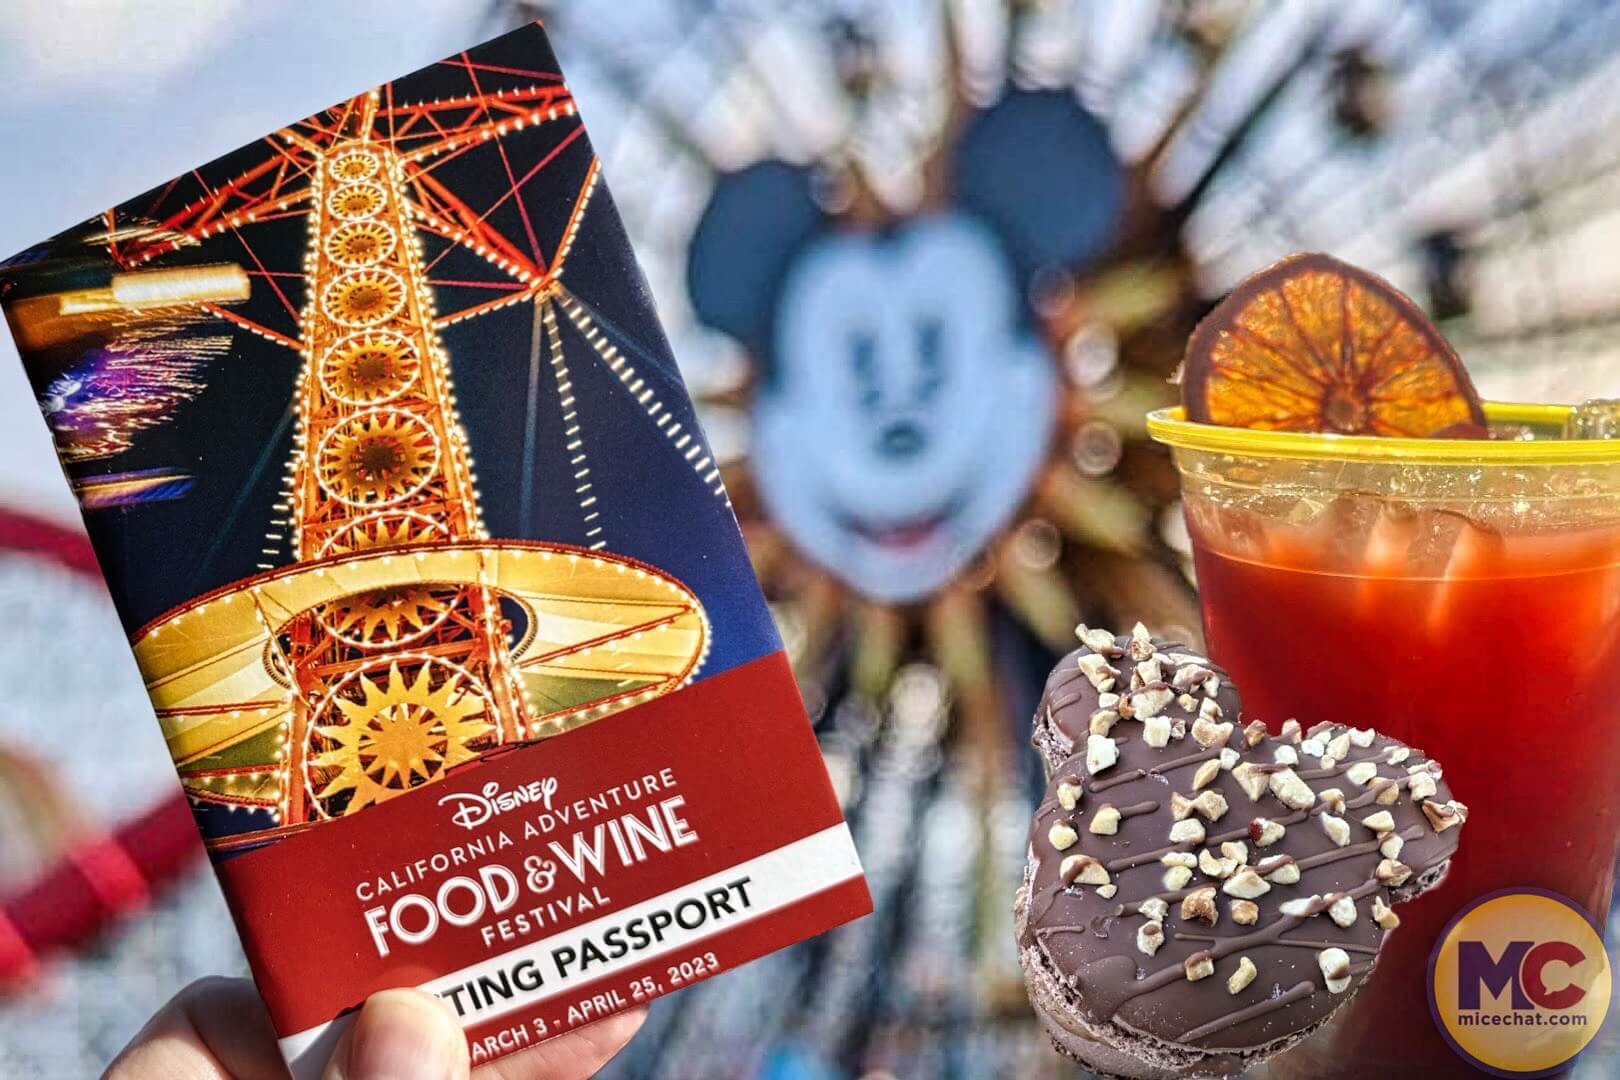 These 7 Disney Kitchen Items Let You Make Your Own 'Food & Wine Festival'  at Home - Inside the Magic